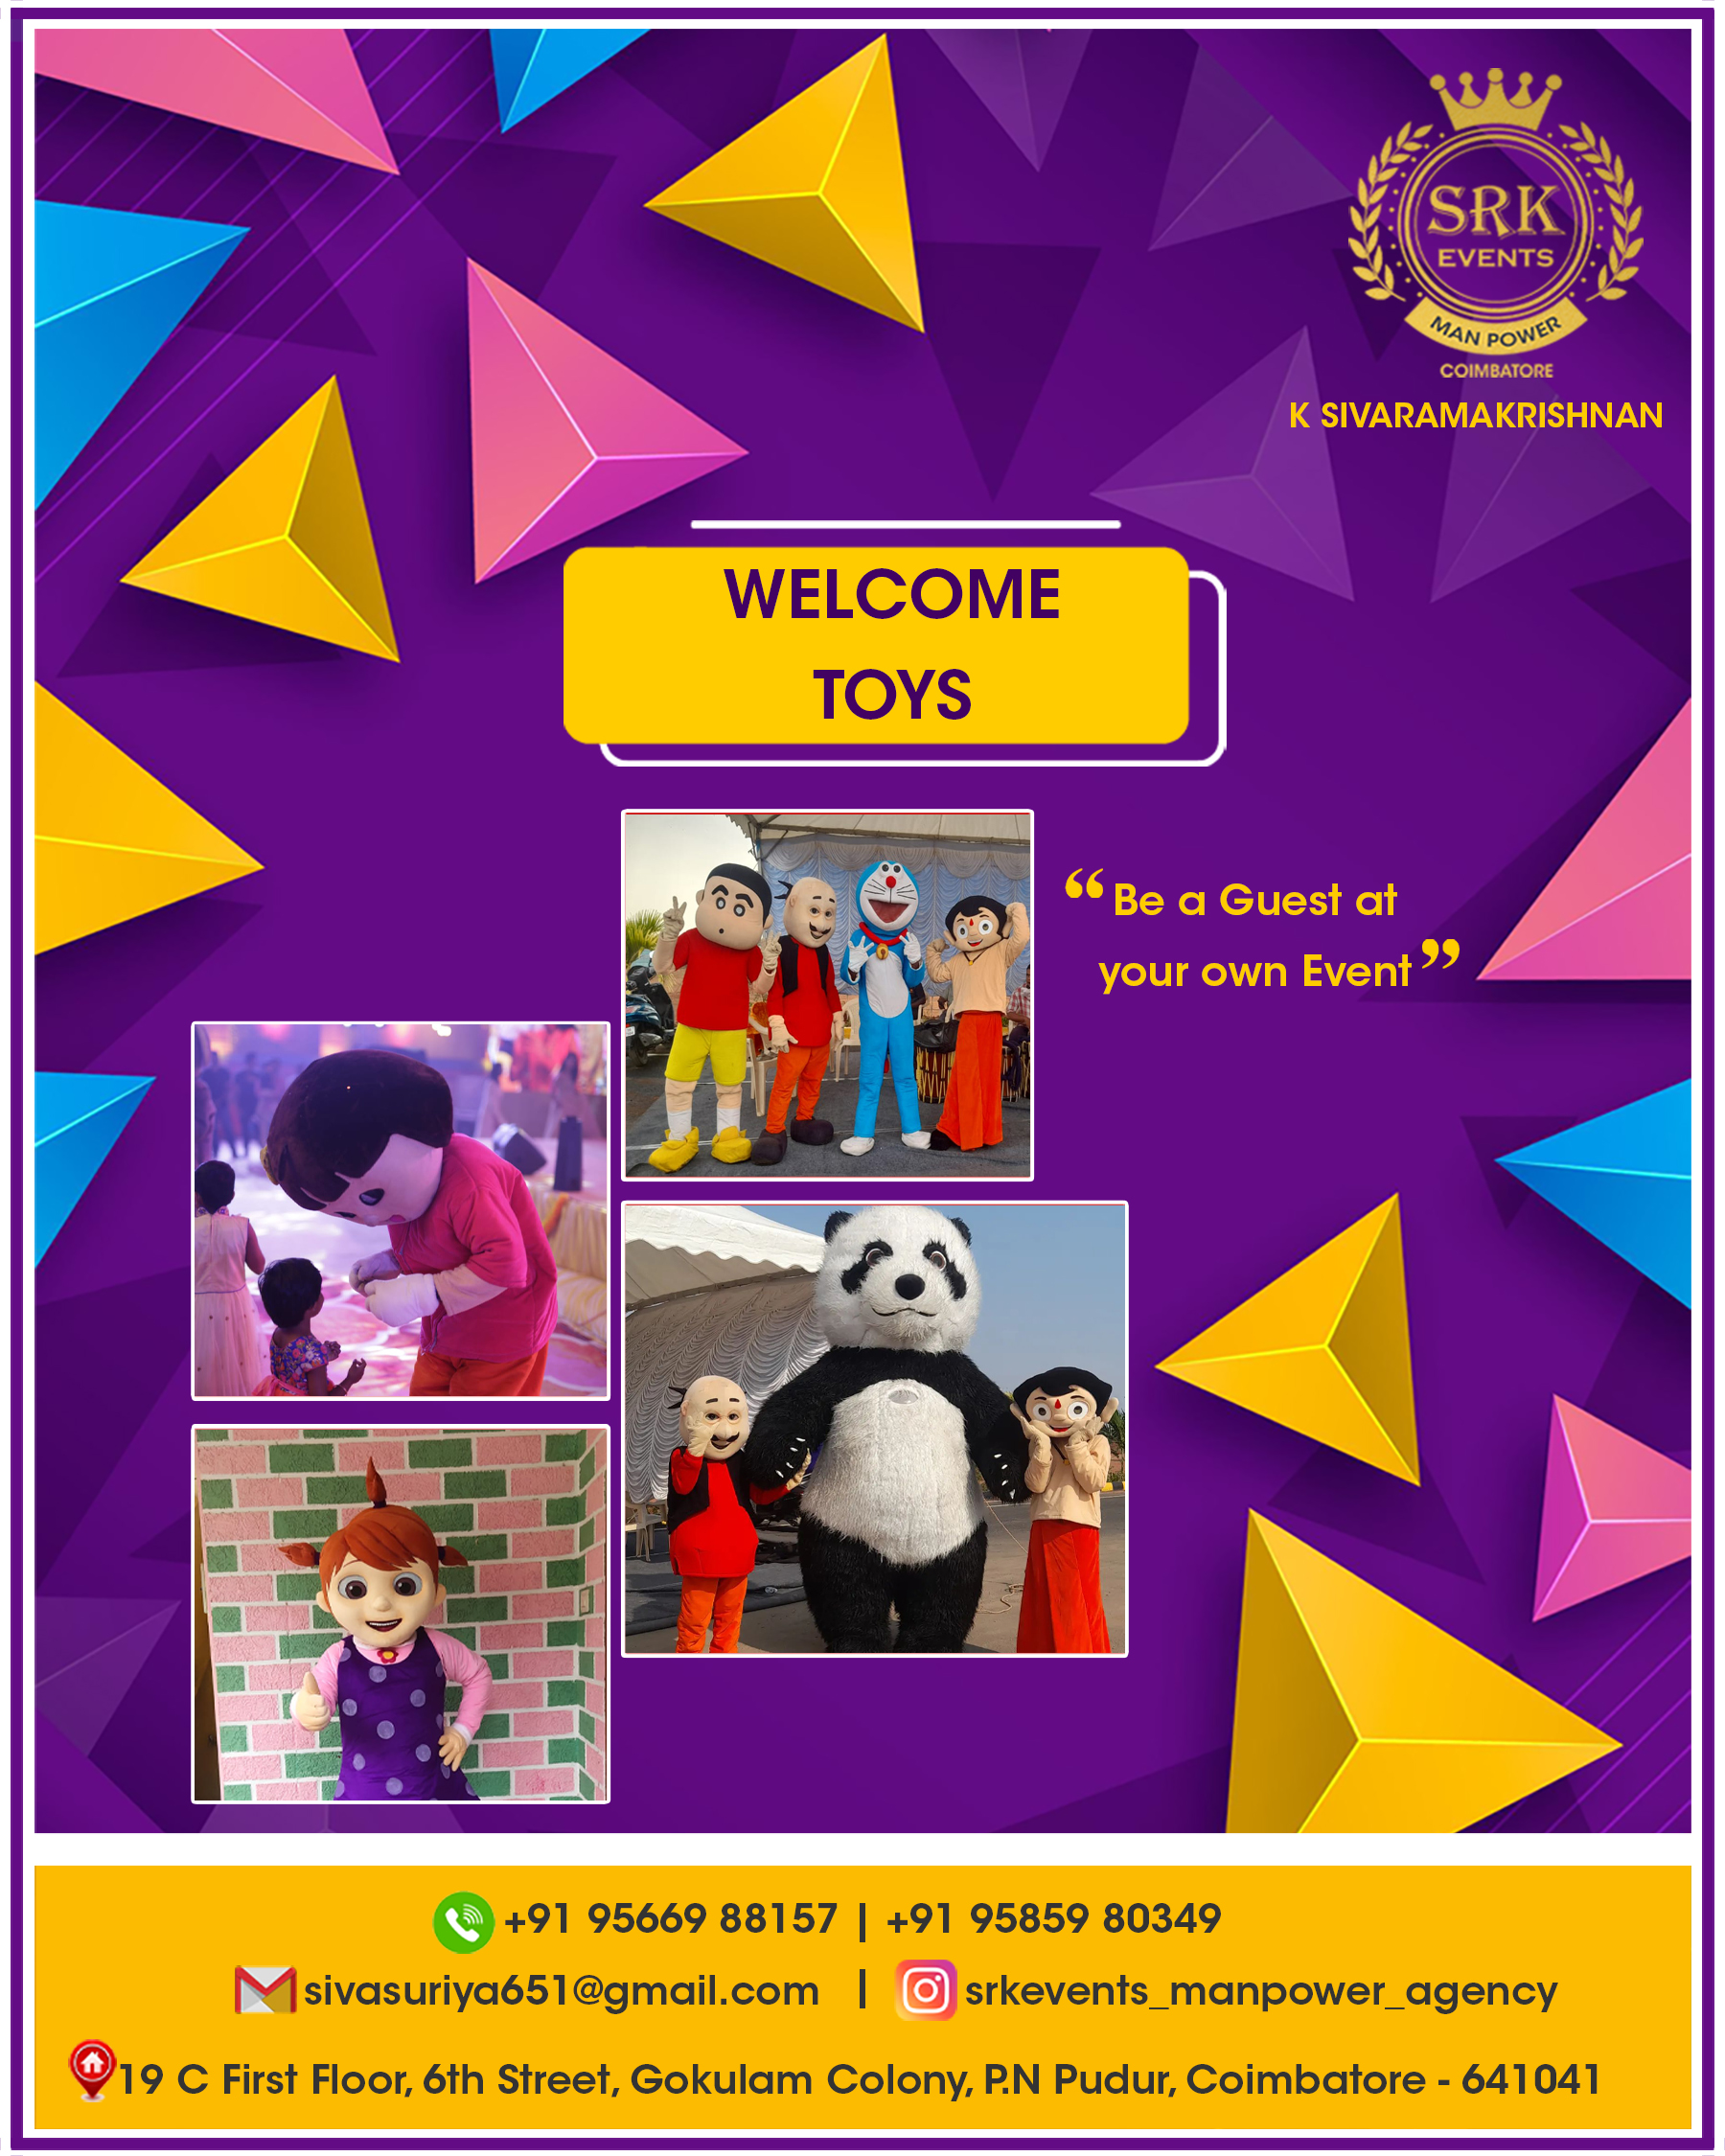 14WELCOME TOYS TEMPLATE.jpg